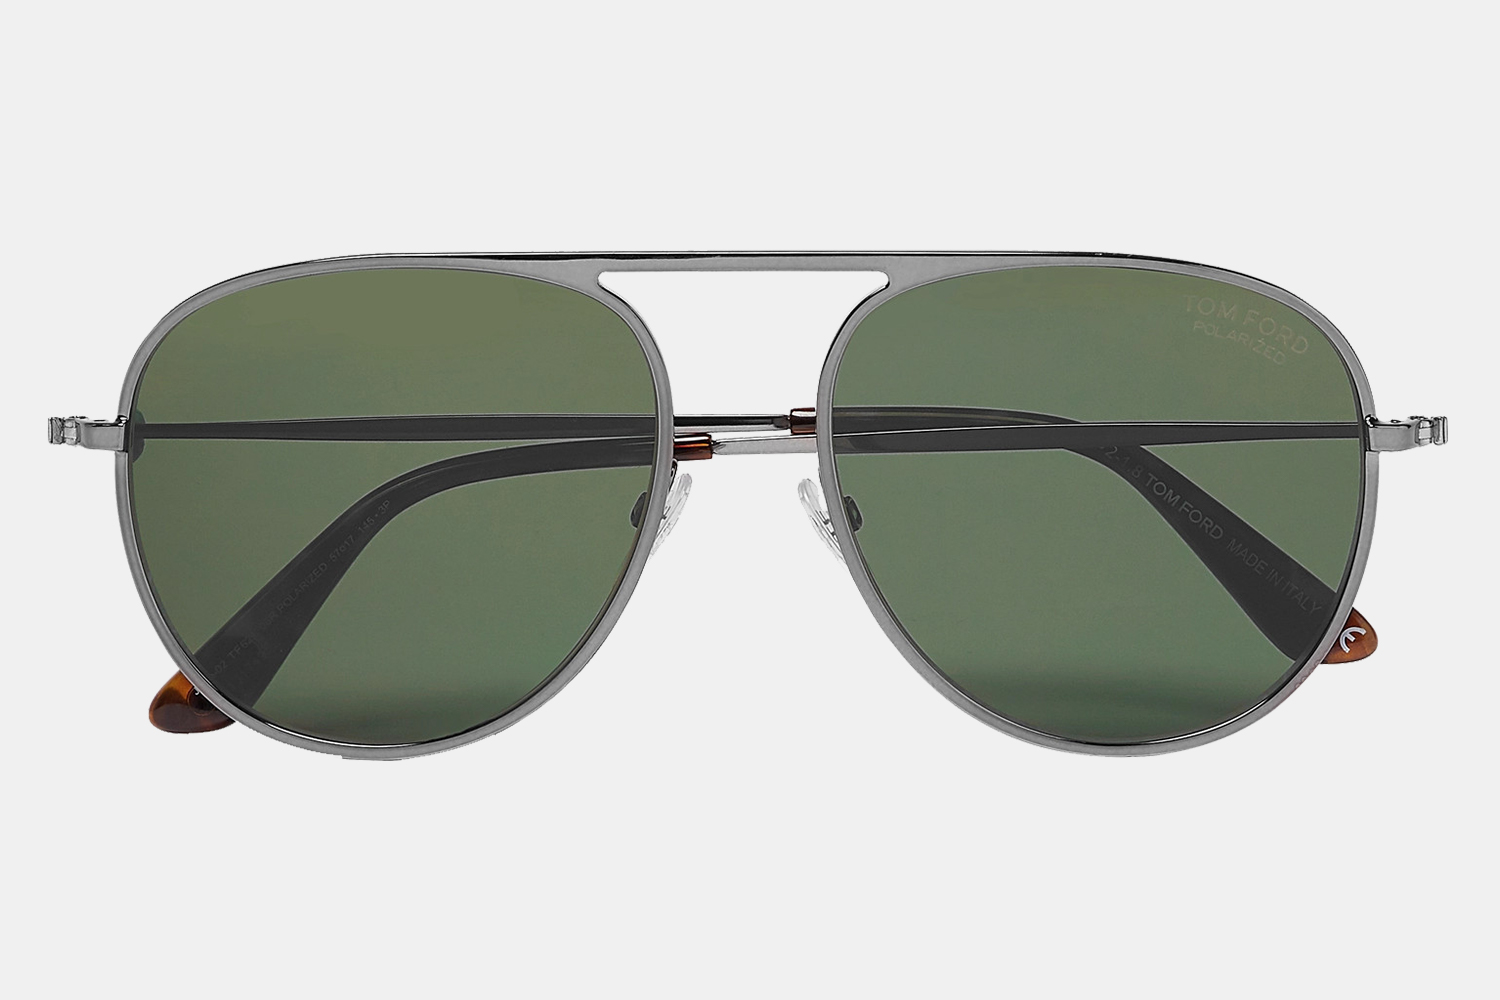 Take Hundreds Off Sunglasses From Tom Ford, Persol and More - InsideHook